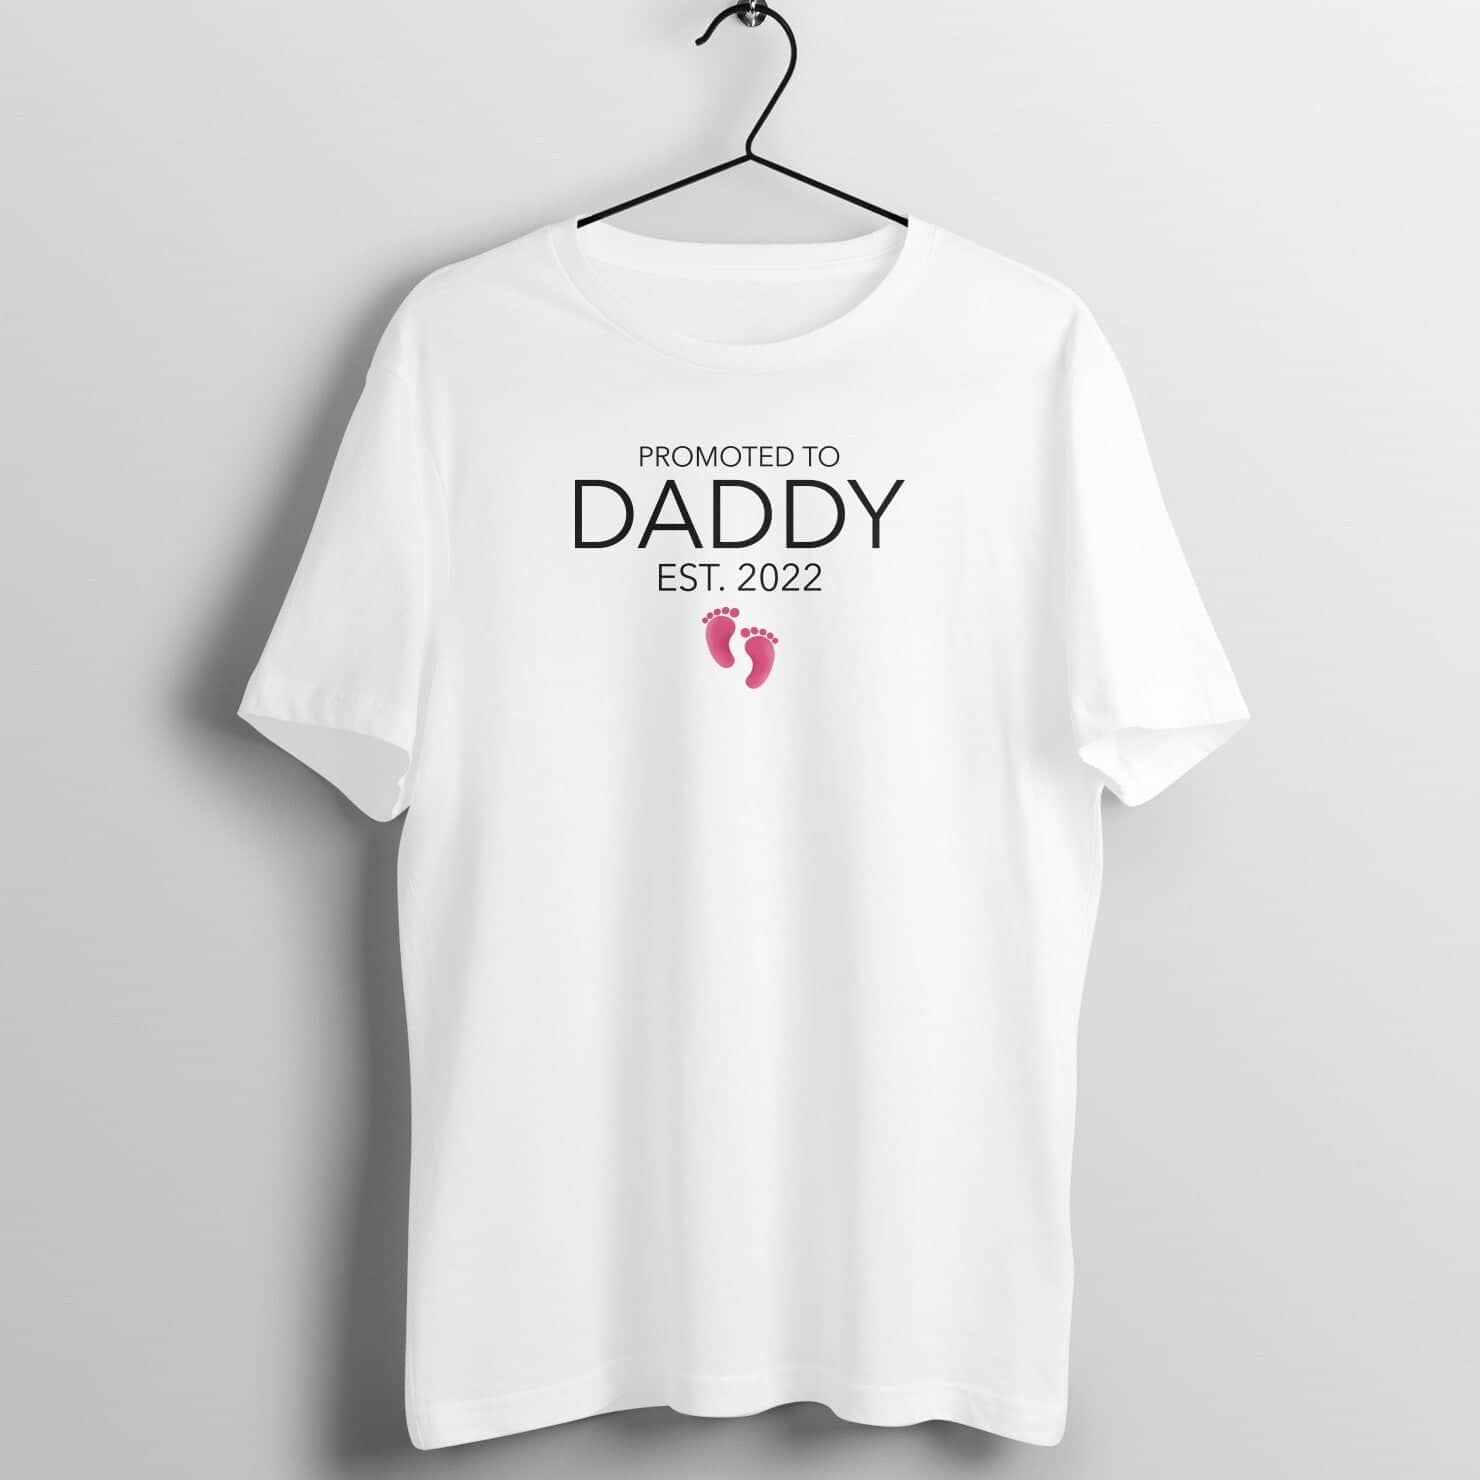 Promoted to Daddy Est. 2022 Special White T Shirt for Men Shirts & Tops Printrove White S 